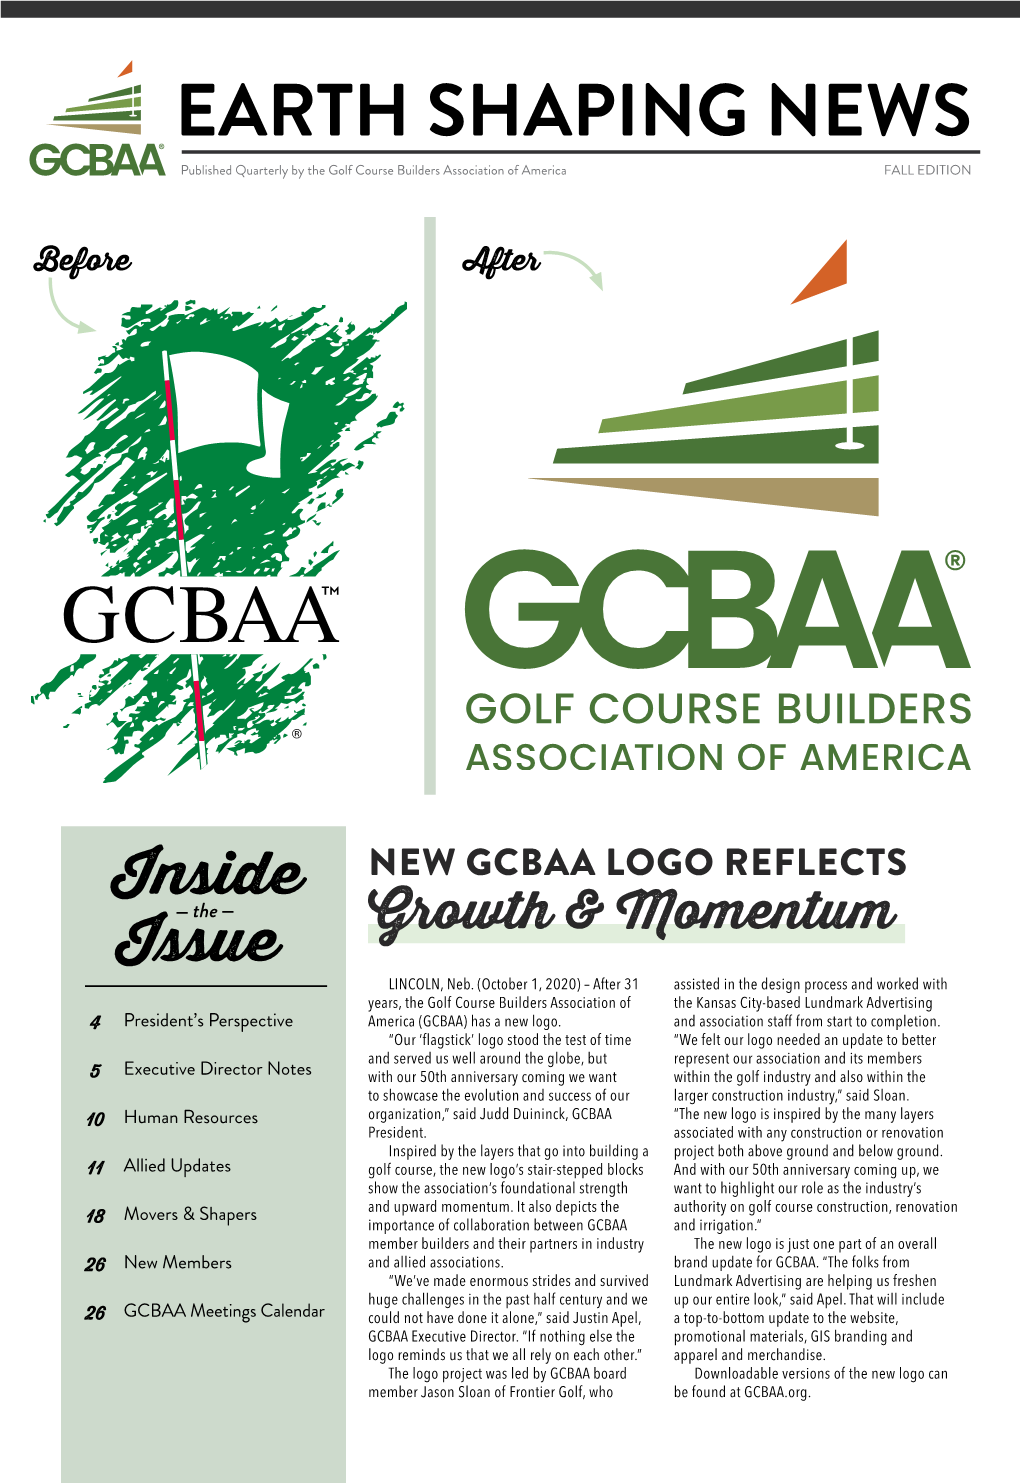 EARTH SHAPING NEWS Published Quarterly by the Golf Course Builders Association of America FALL EDITION